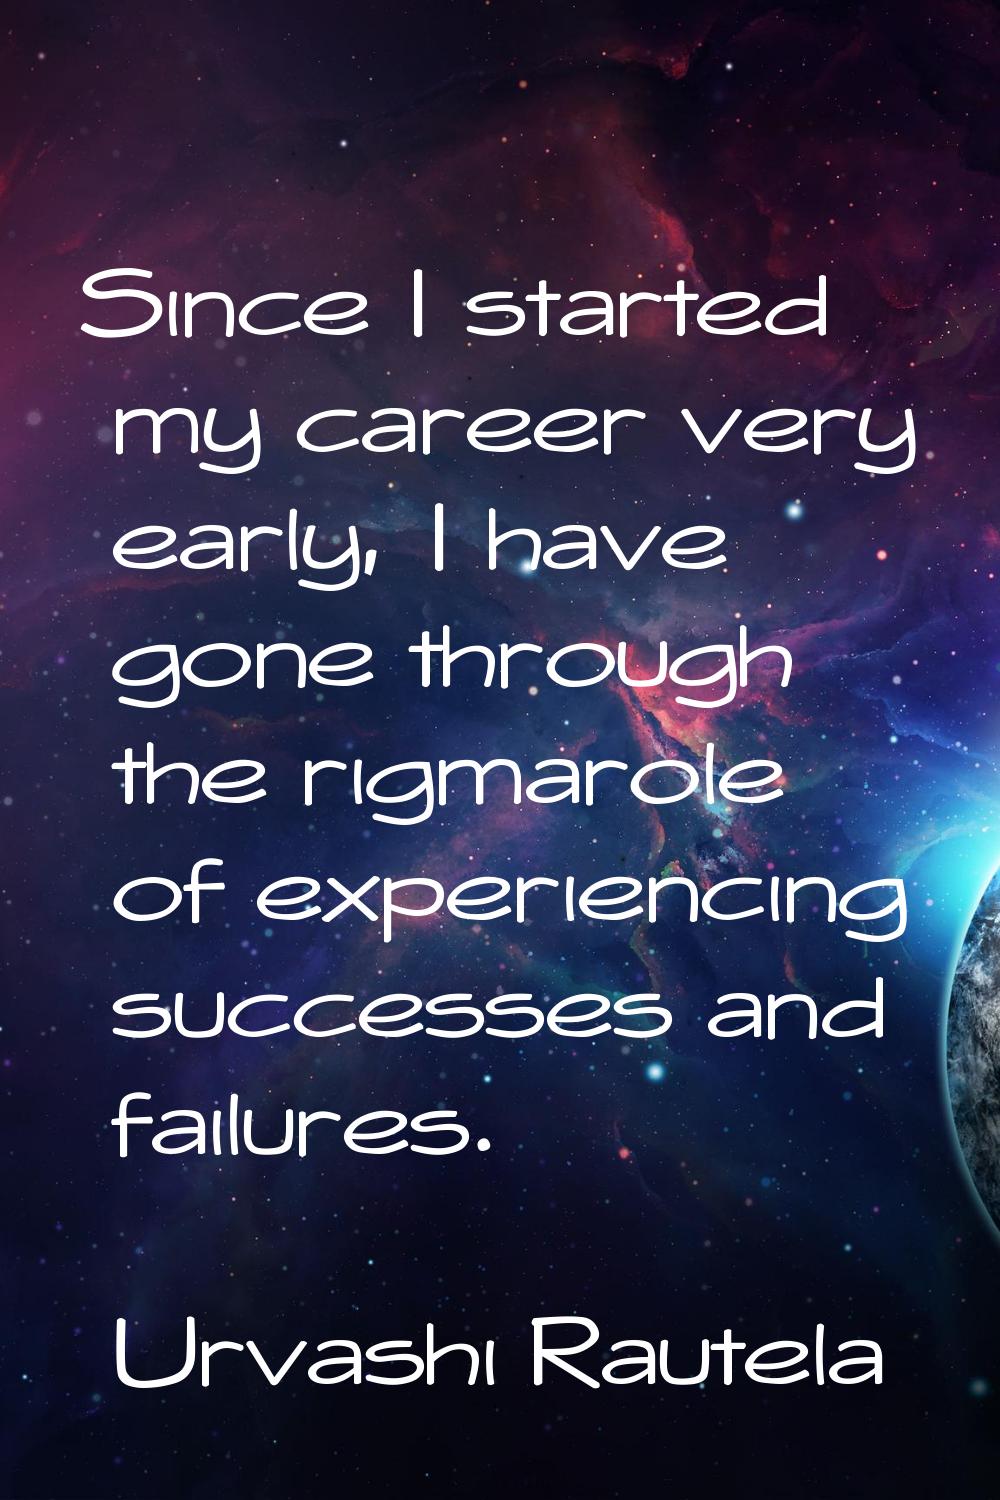 Since I started my career very early, I have gone through the rigmarole of experiencing successes a